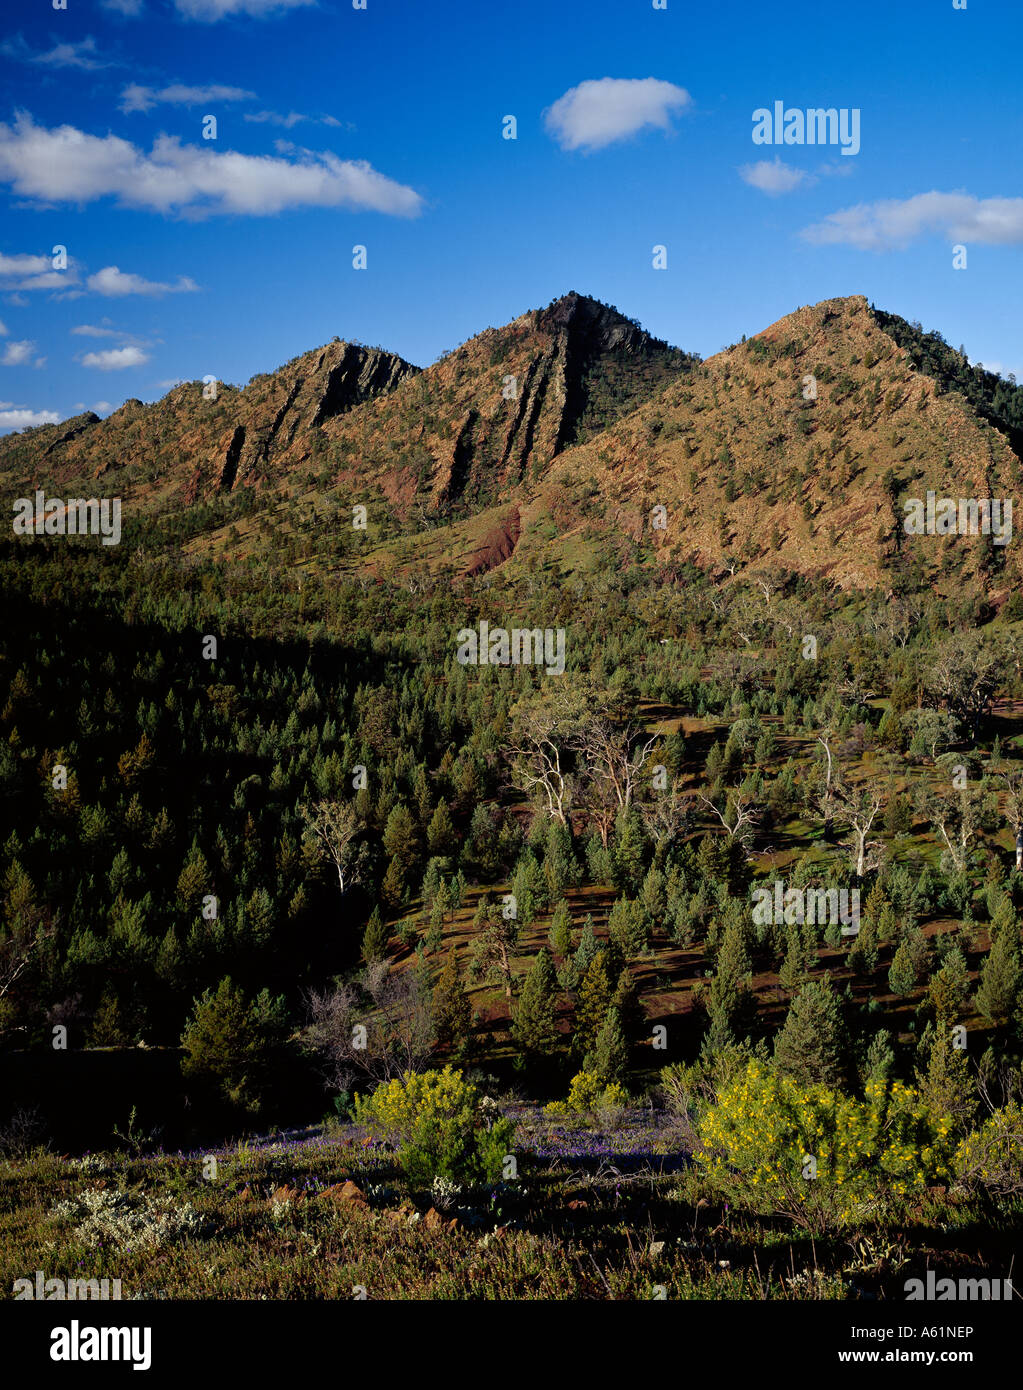 Rugged landscape with Cypress Pines near Bunyeroo Gorge in the Flinders Ranges National Park South Australia Stock Photo